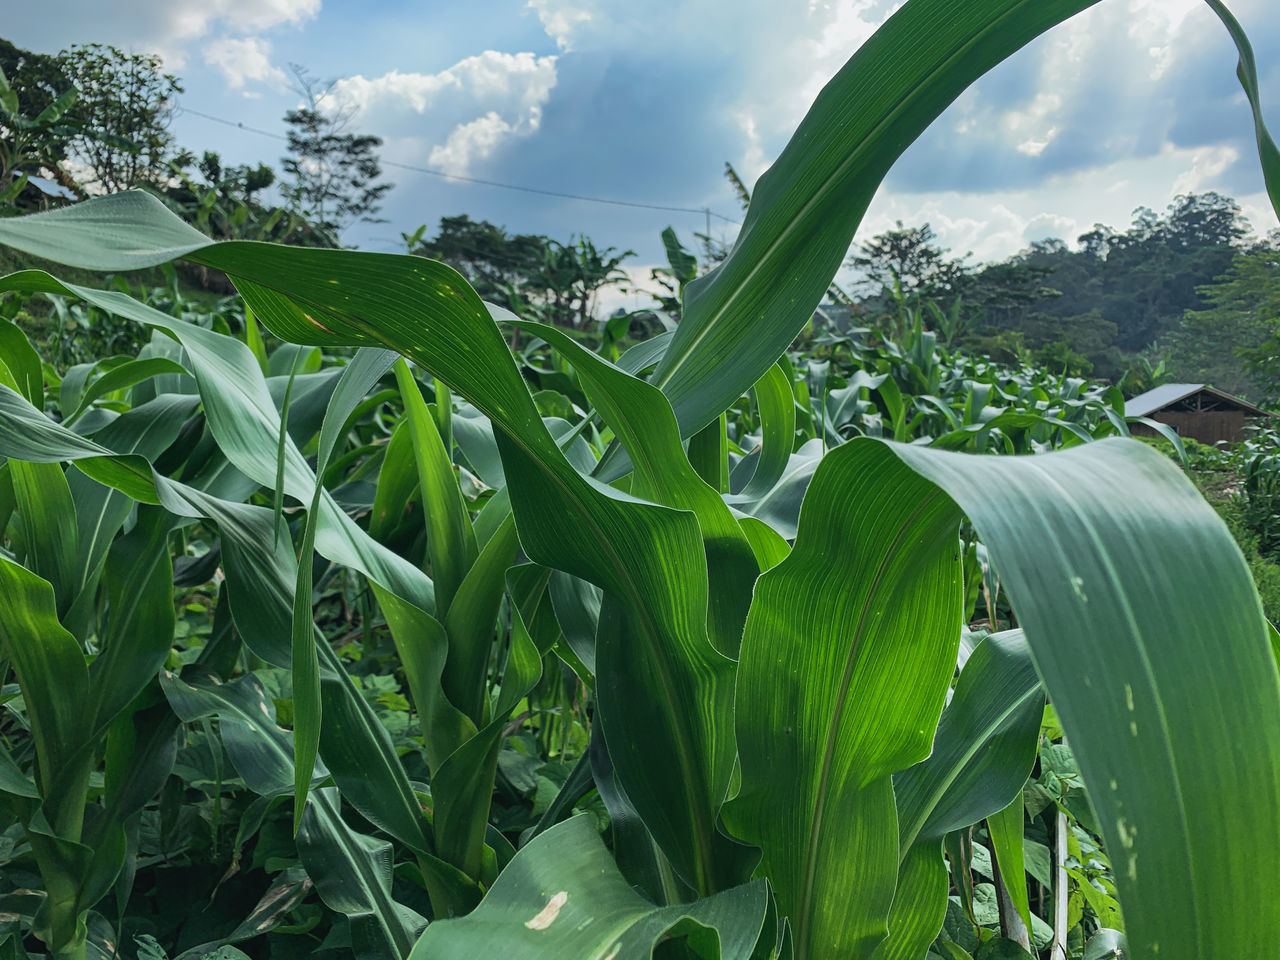 plant, green, growth, corn, agriculture, nature, landscape, cloud, sky, field, crop, land, leaf, food, plant part, food and drink, rural scene, cereal plant, environment, flower, no people, beauty in nature, vegetable, farm, day, outdoors, grass, food grain, freshness, scenics - nature, banana tree, banana leaf, plantation